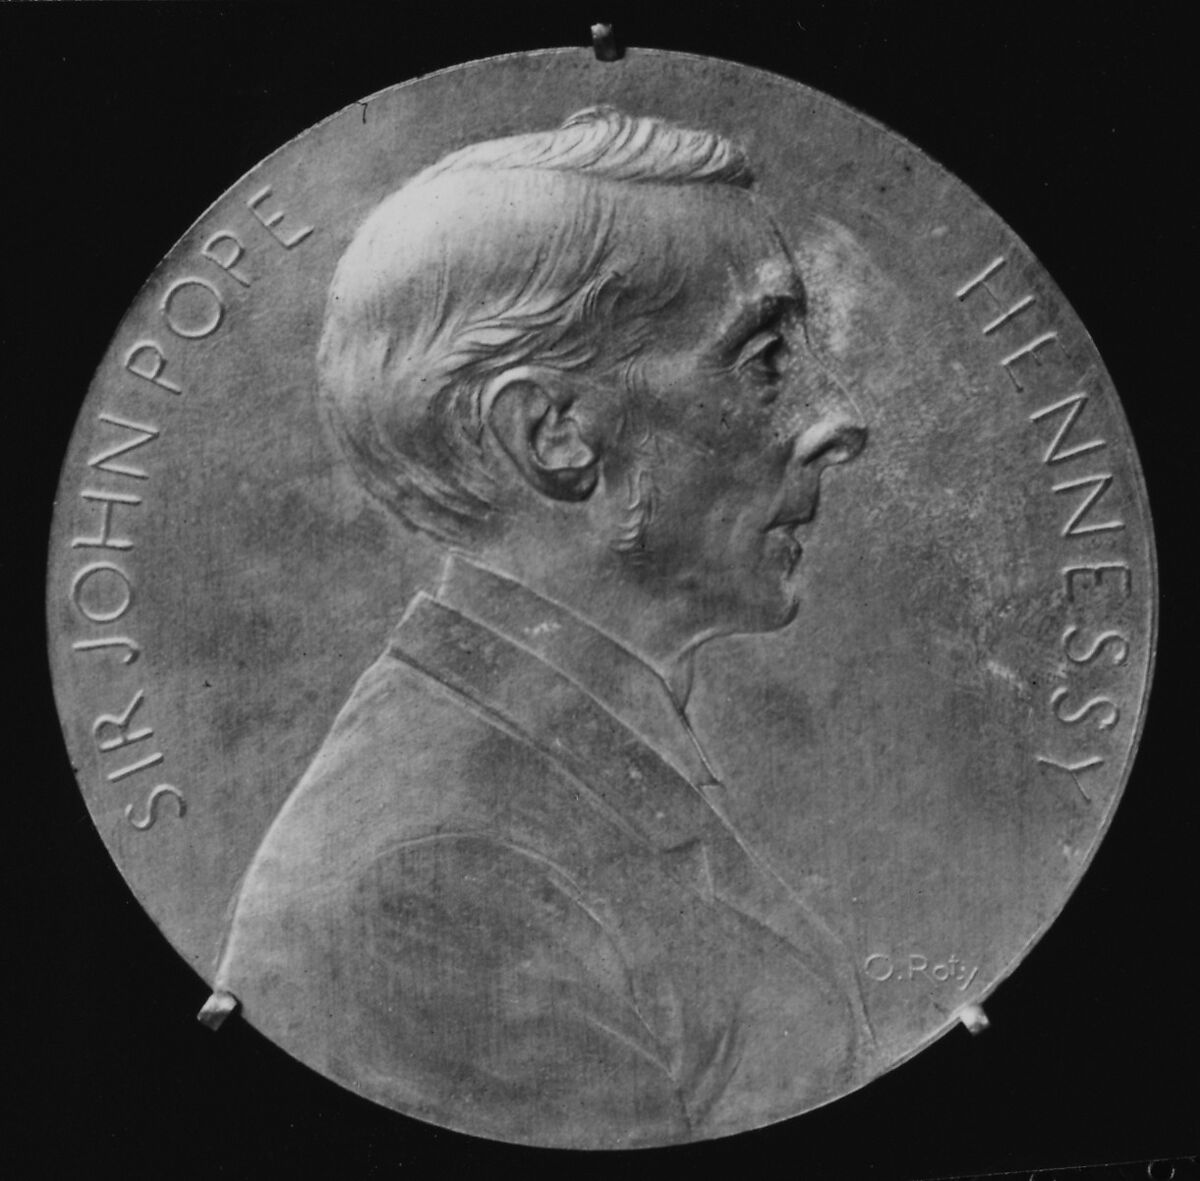 Sir John Pope Hennessy (K.C.M.G.), Governor of Mauritius, Medalist: Louis-Oscar Roty (French, Paris 1846–1911 Paris), Bronze, struck, silvered, French 